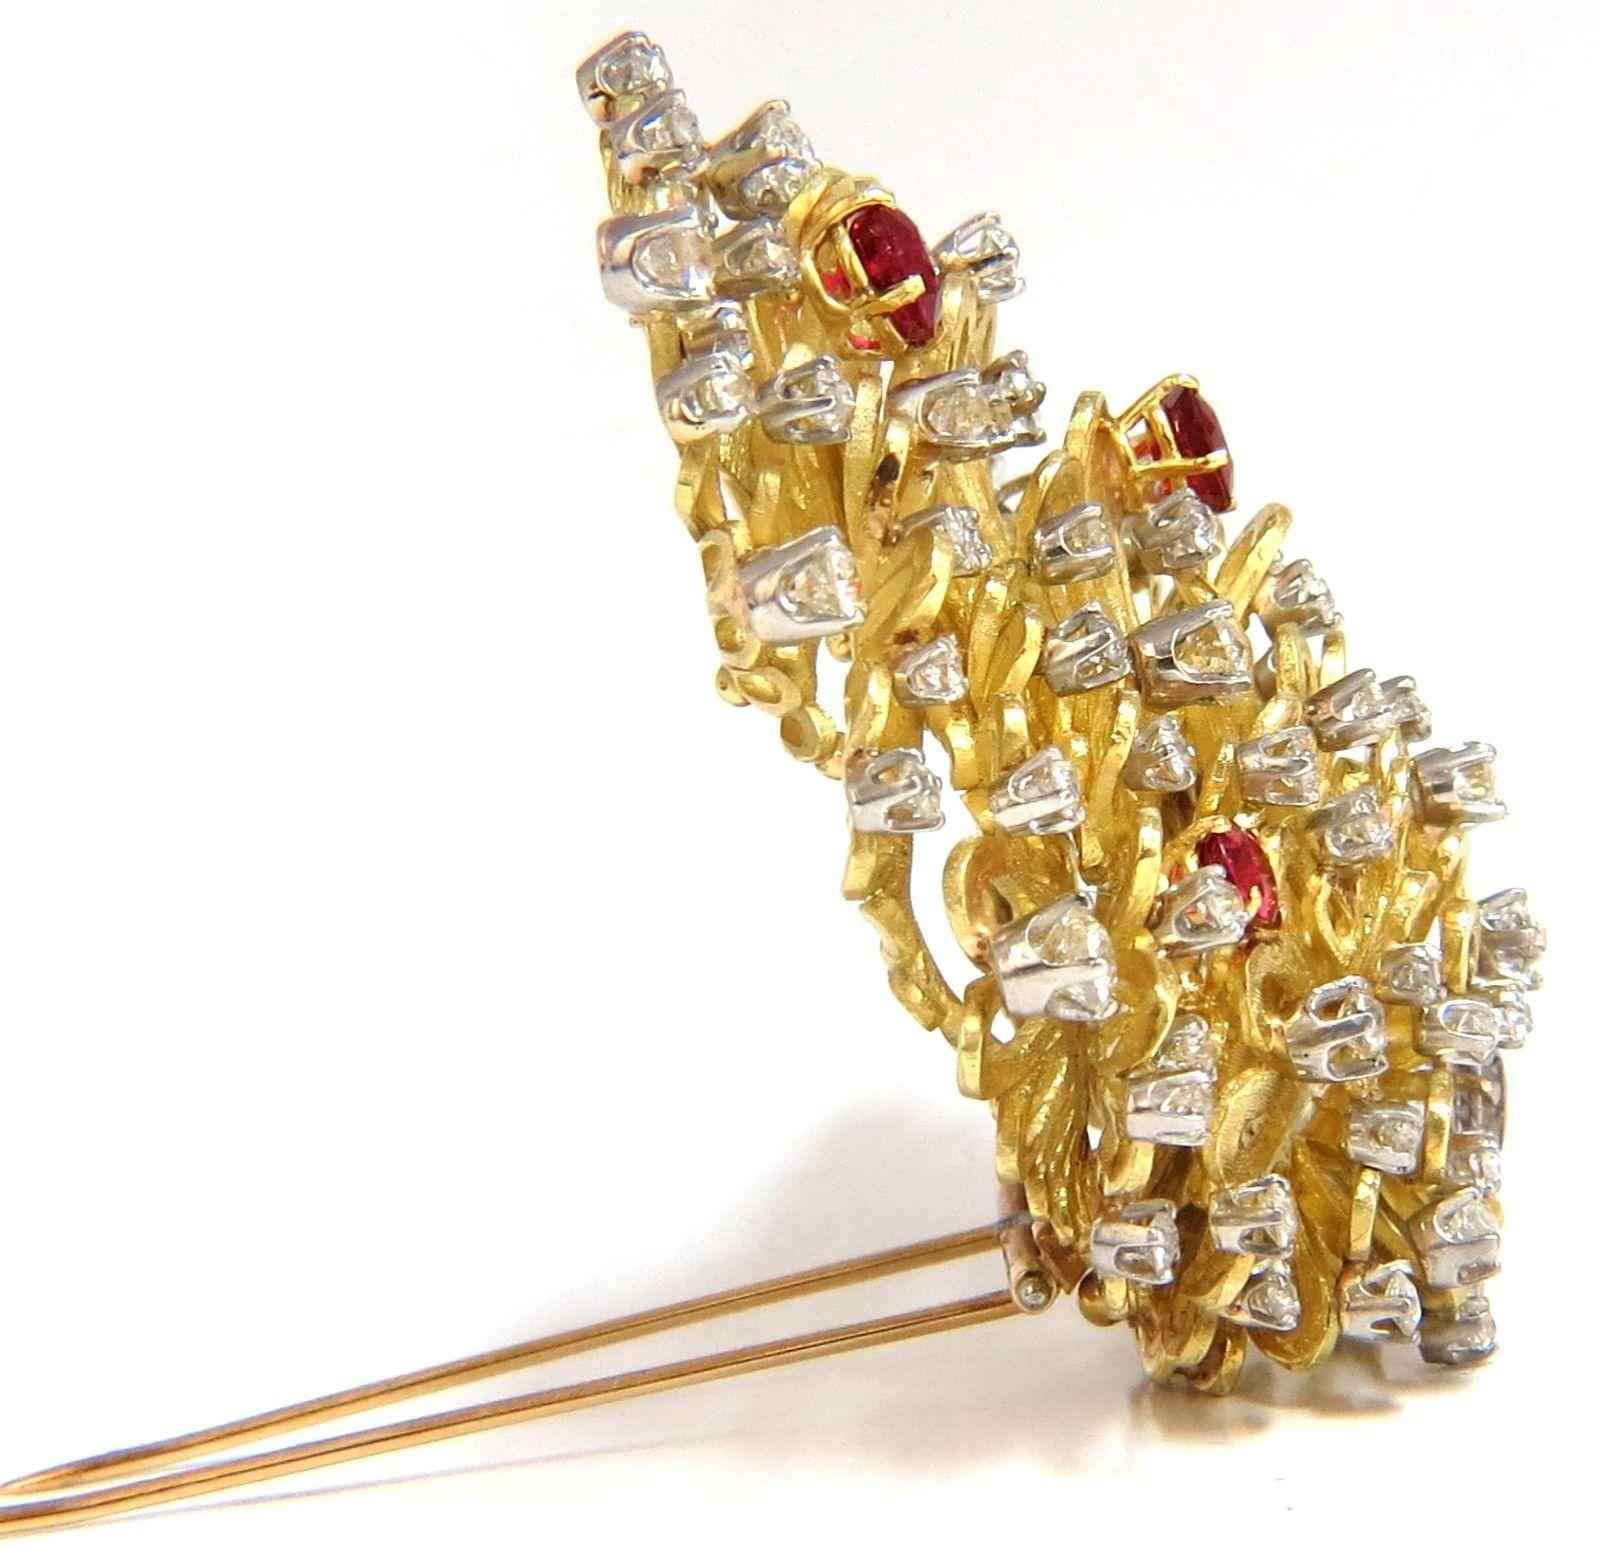 Erwin Pearl 8.00 Carat Natural Diamonds and Red Spinel Brooch Pin 18 Karat In New Condition For Sale In New York, NY